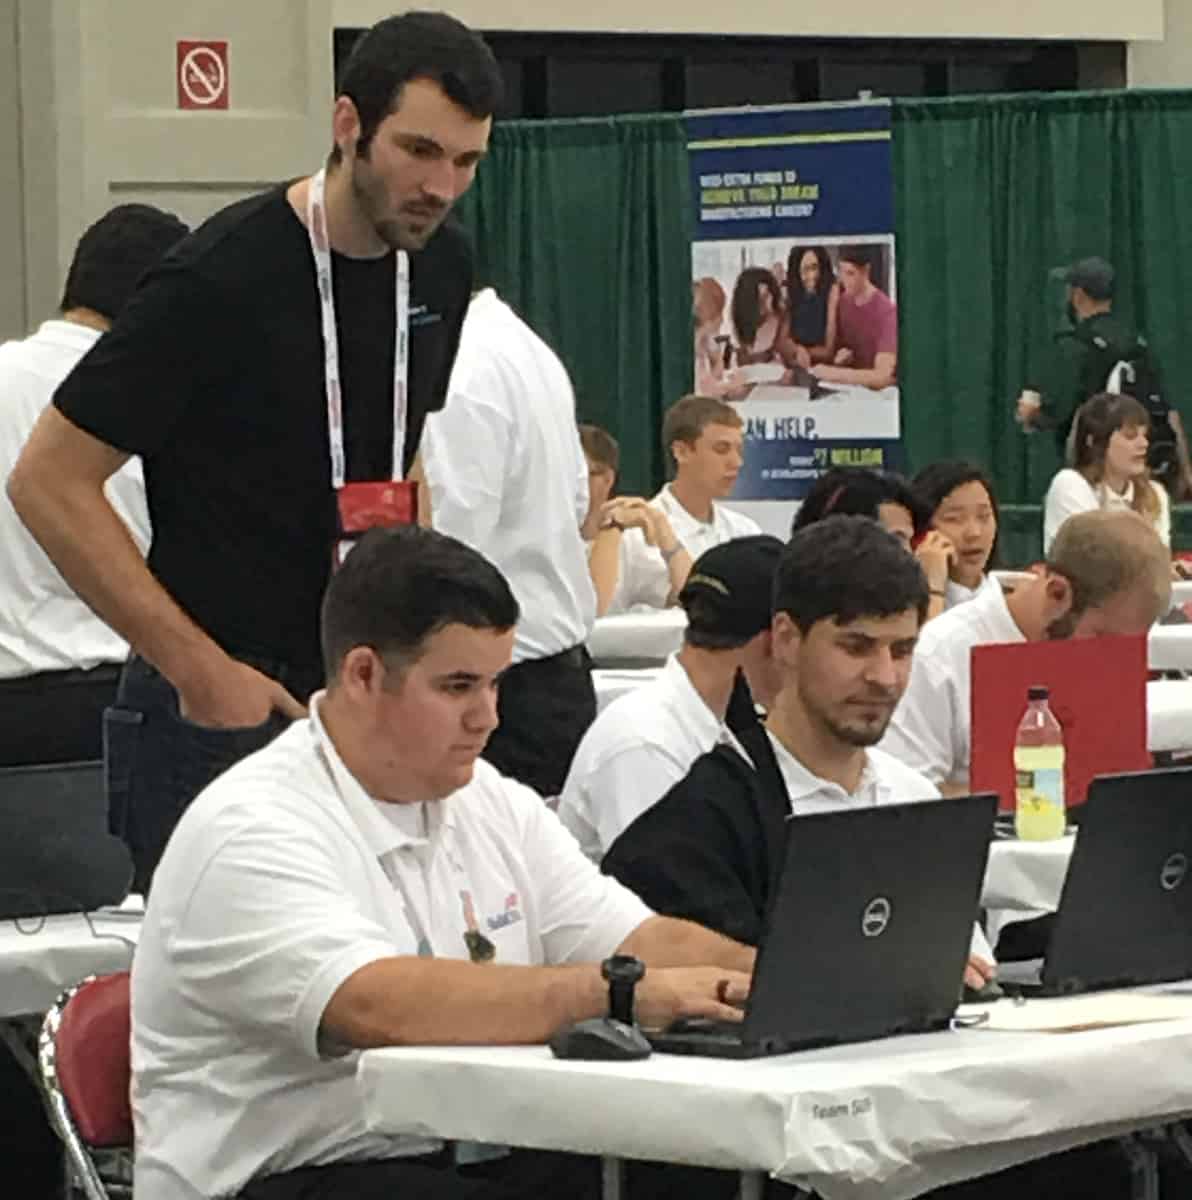 South Georgia Technical College’s Tison Smith and Chance Westra are shown above participating in the Chapter Display competition.